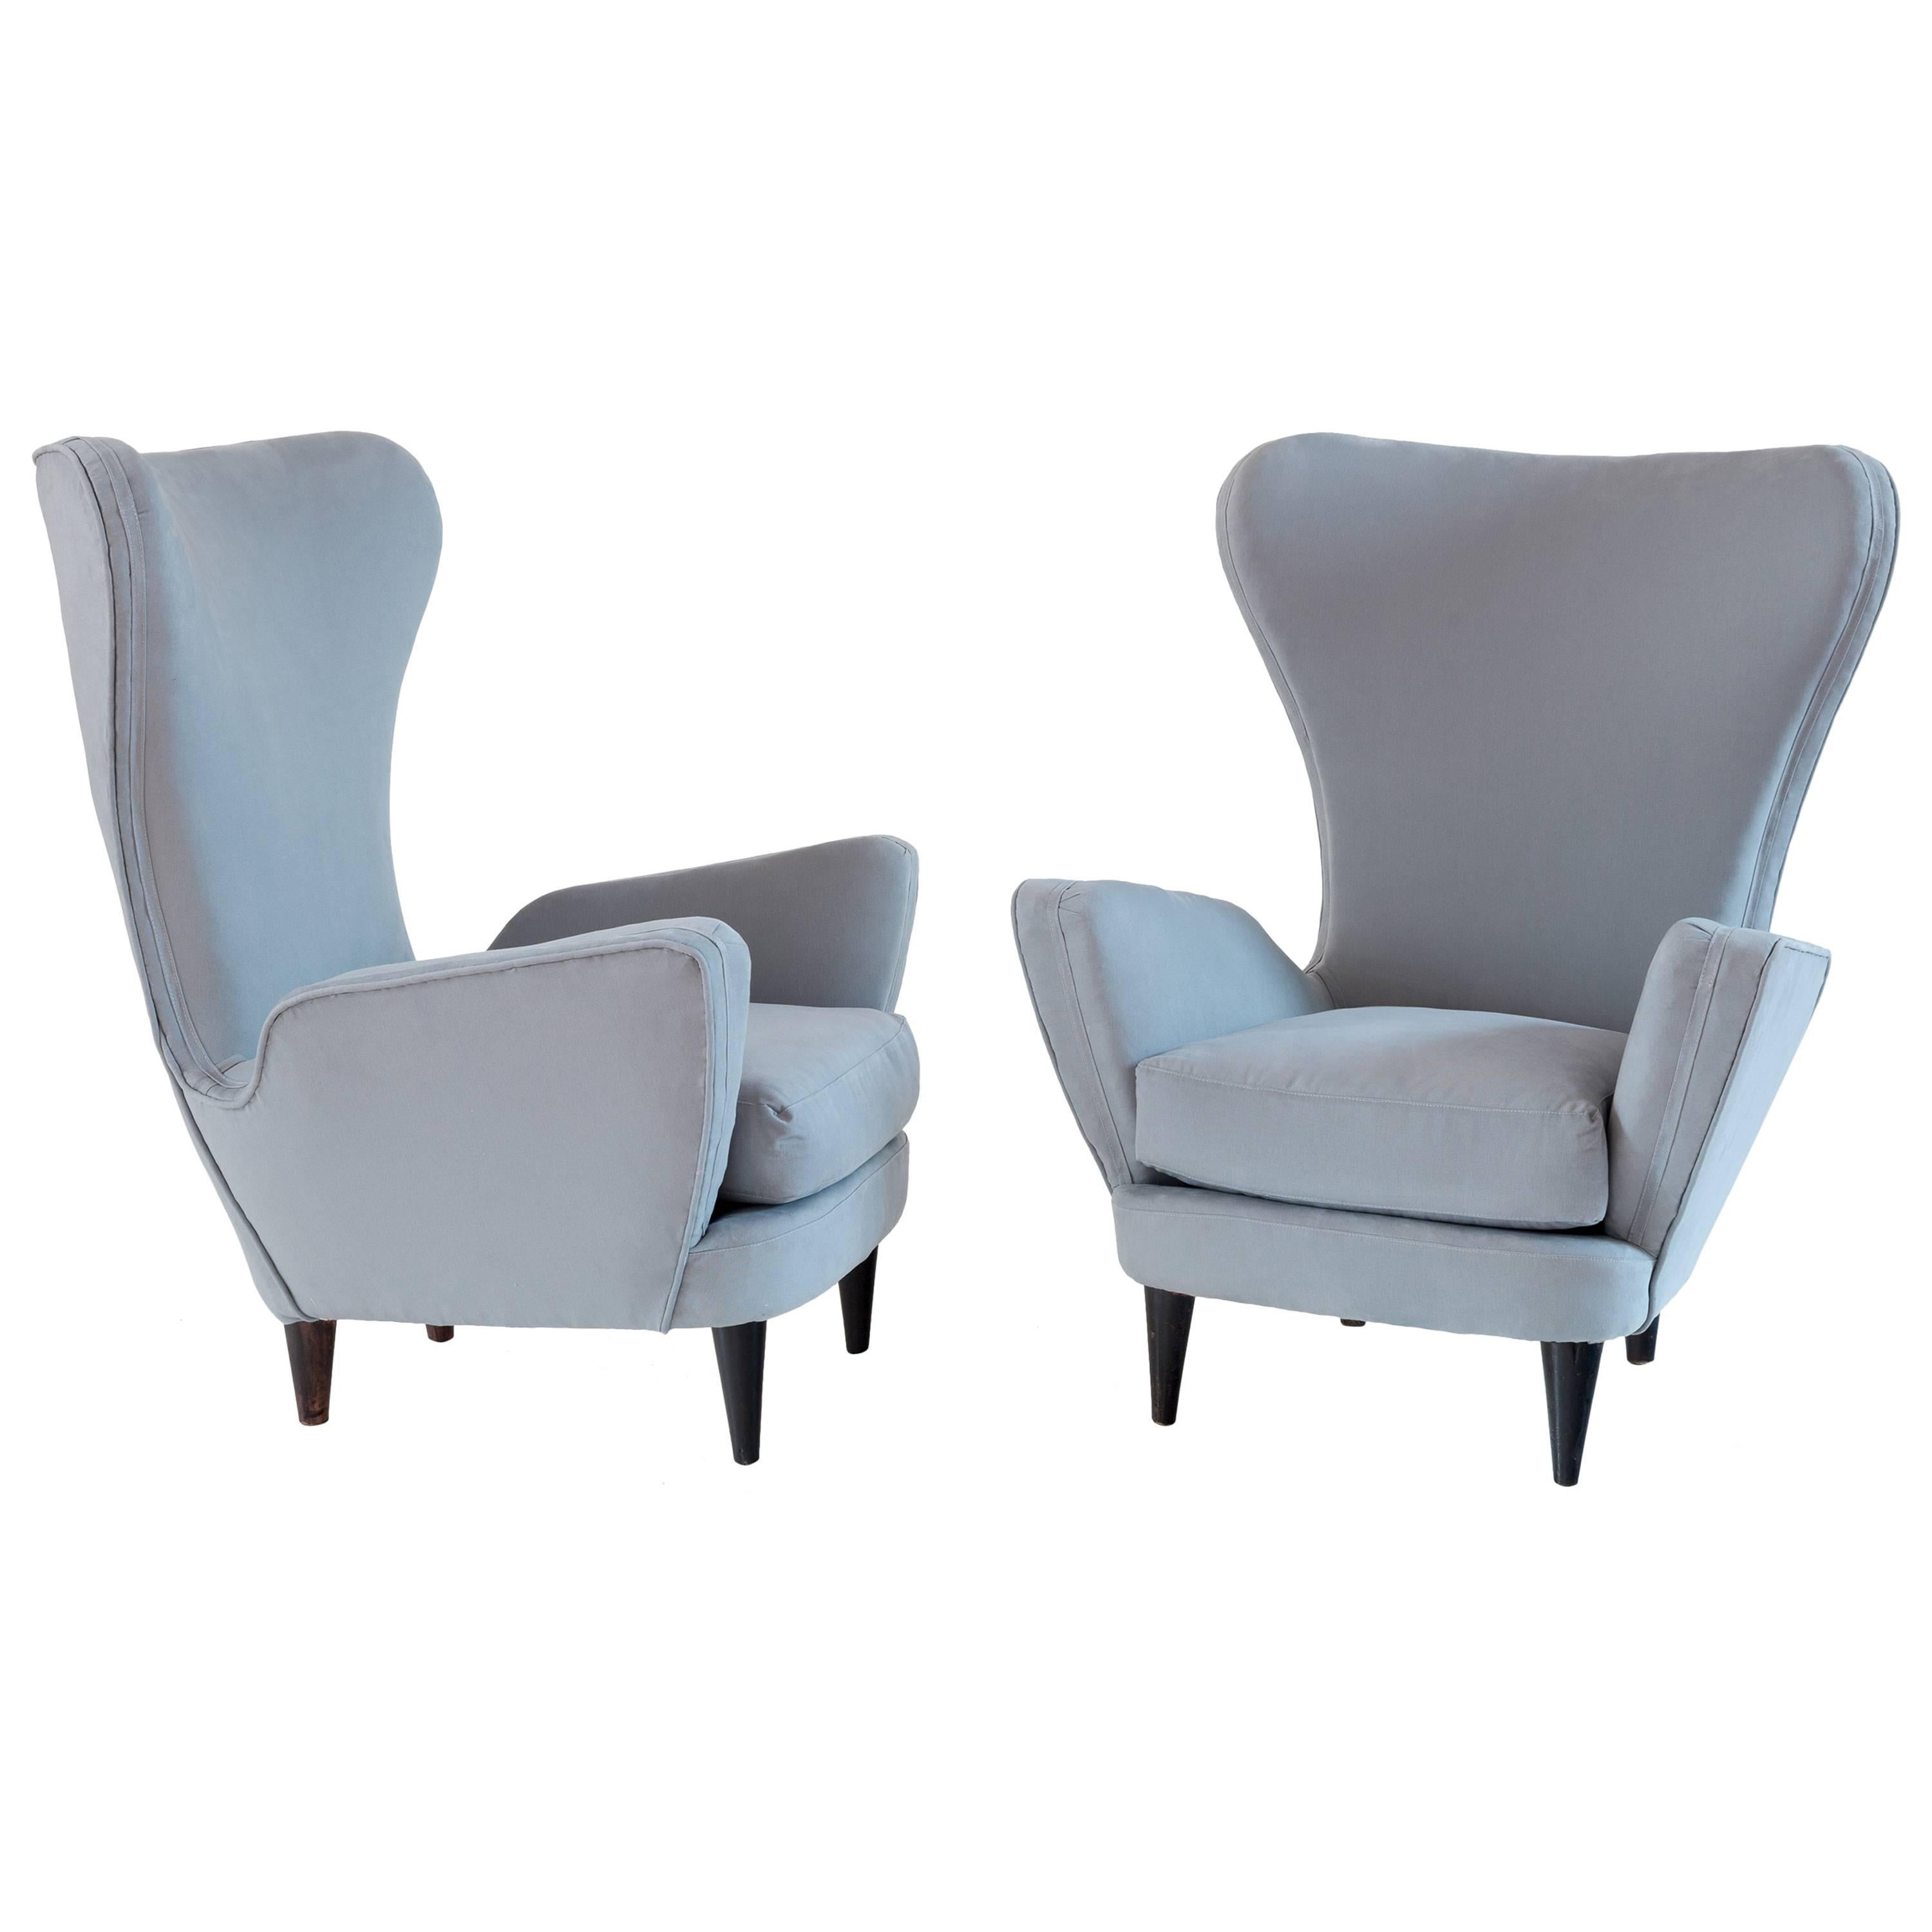 Sculptural Pair of High Back Armchairs, 1955